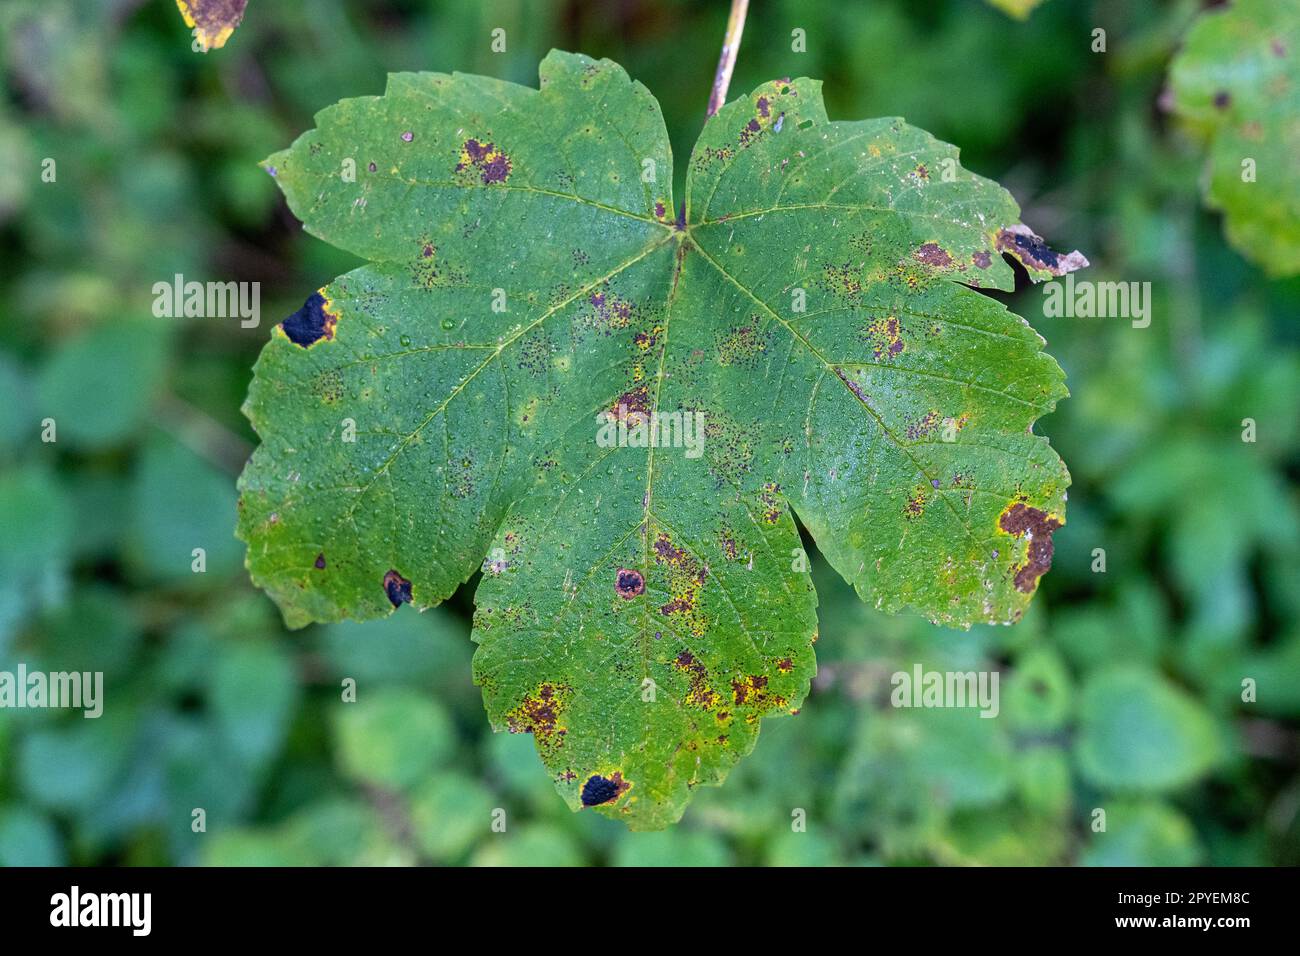 Big green leaf with brown spots, some kind of disease Stock Photo